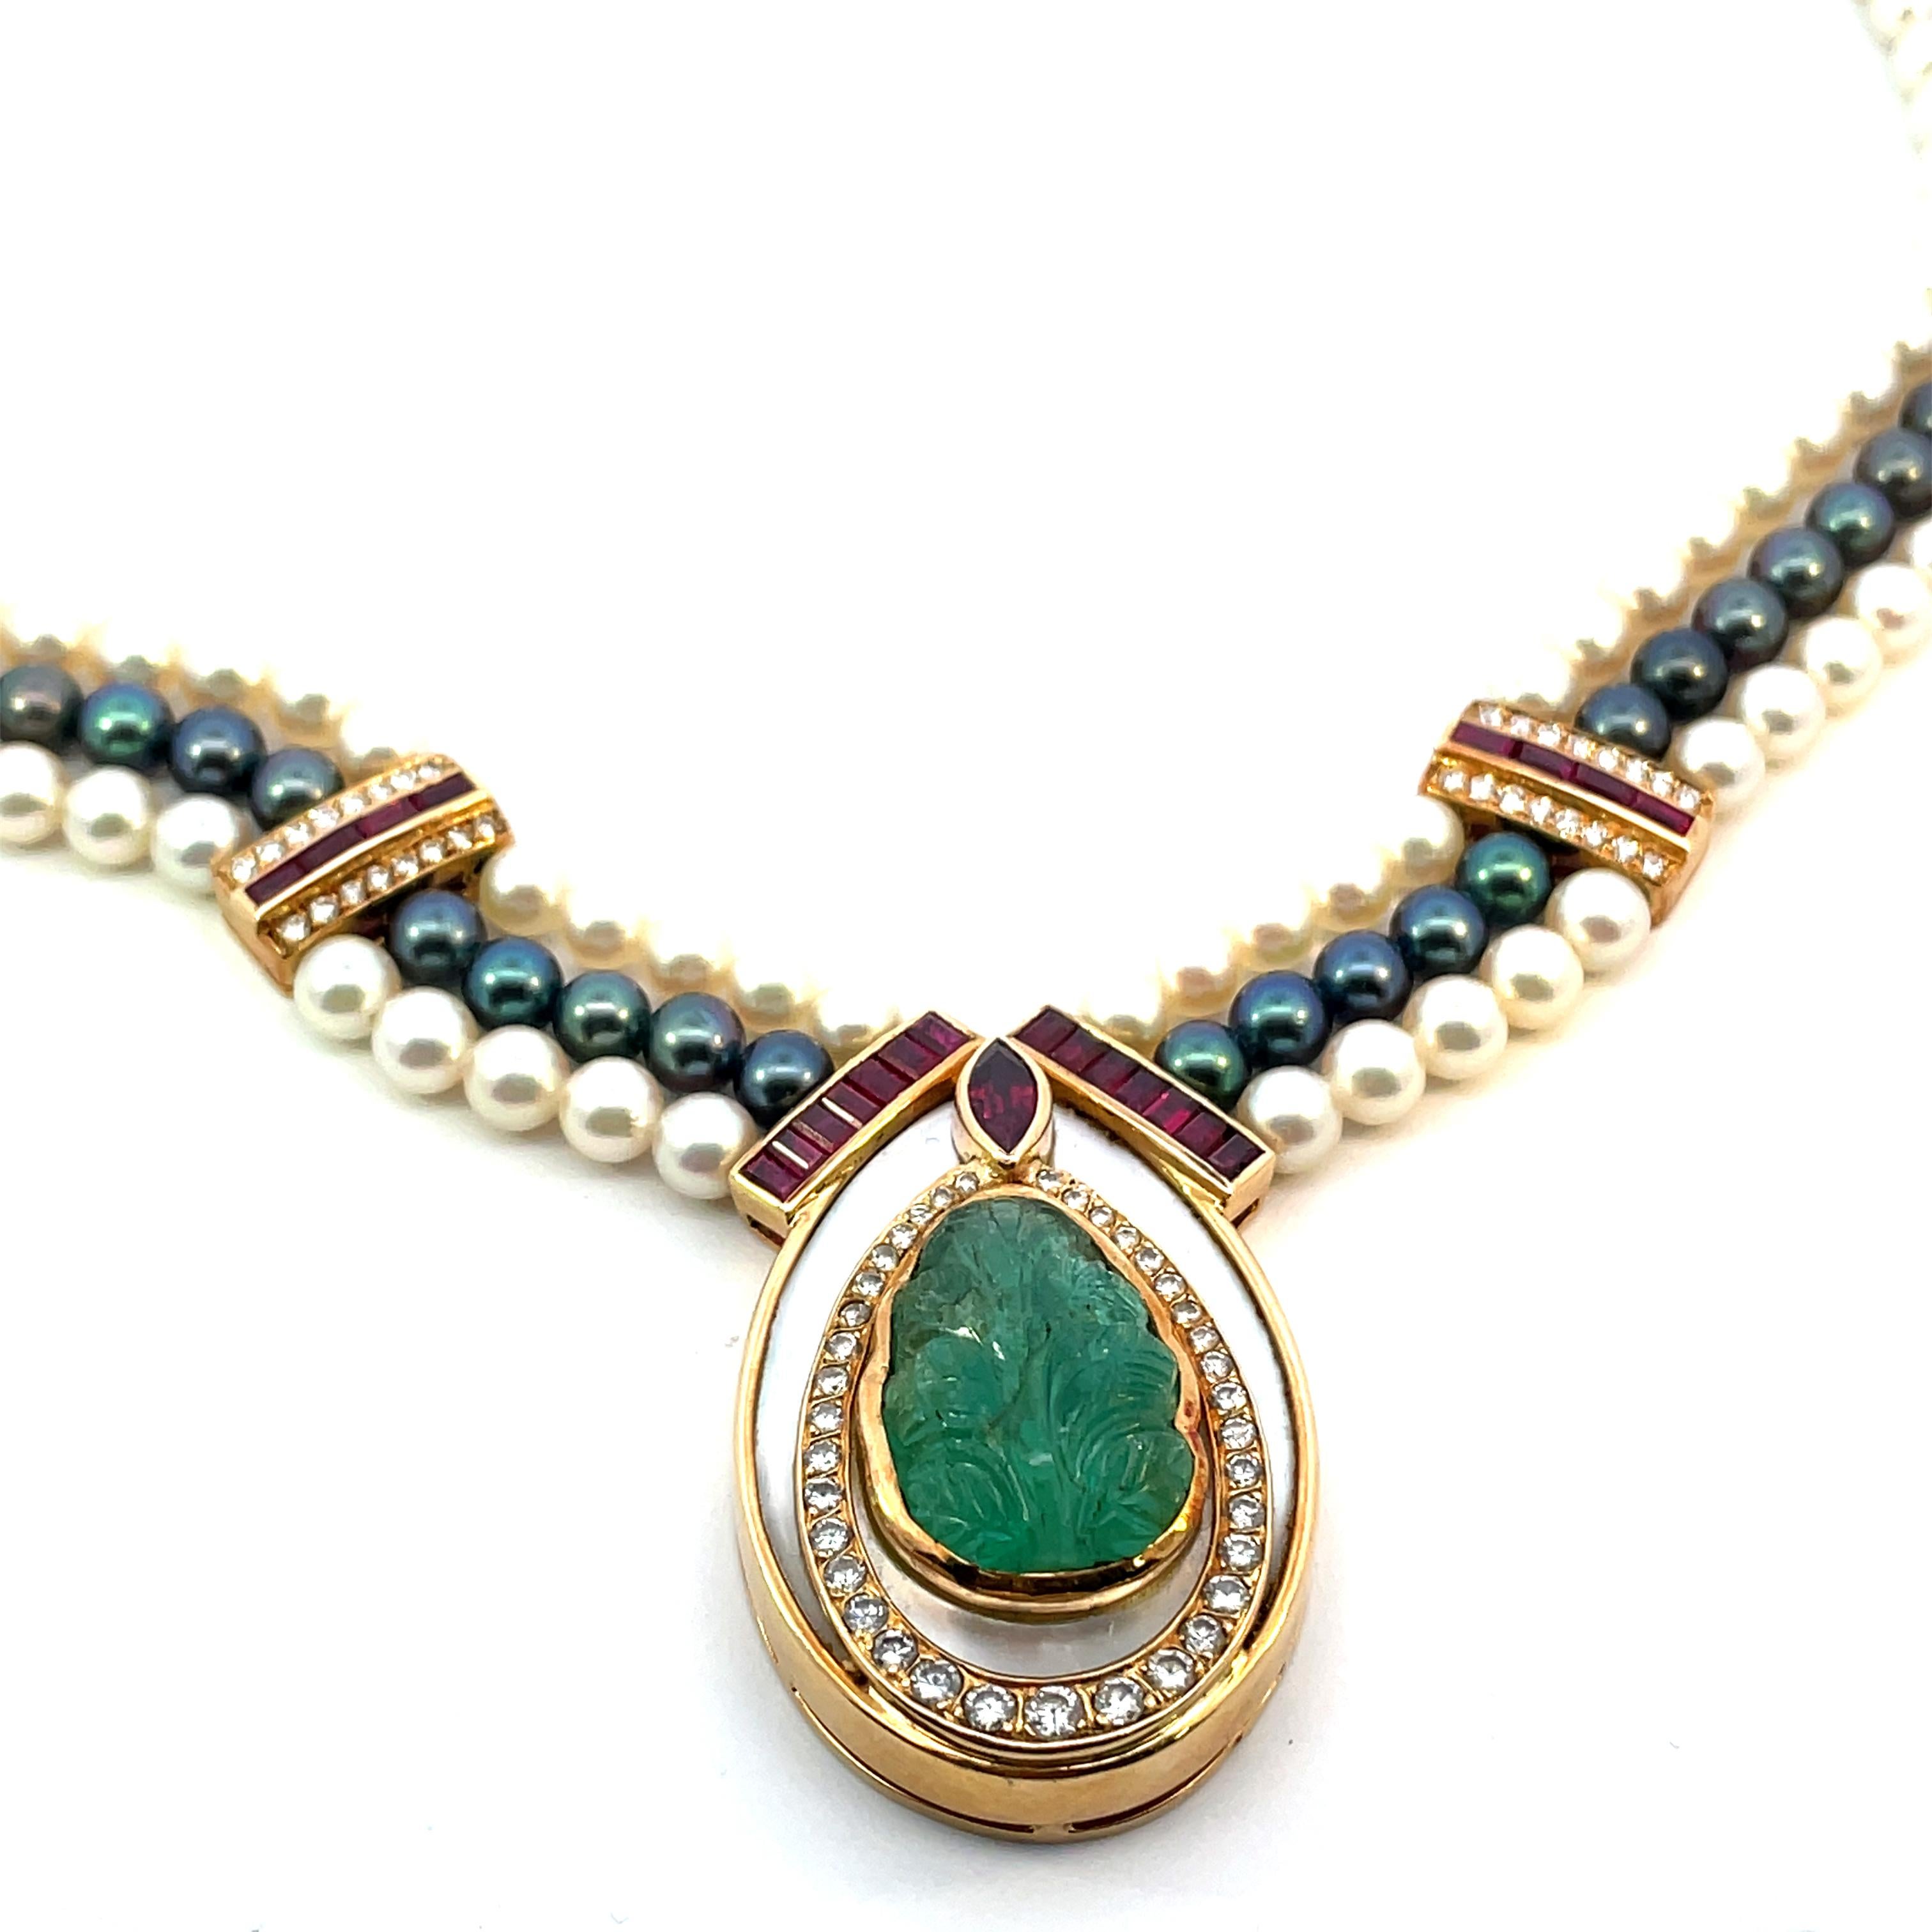 Imagine adorning yourself with a one-of-a-kind Mauboussin Paris necklace, a true masterpiece that mesmerizes with its timeless allure. Nestled at the heart of this necklace is a precious carved emerald, weighing approximately 12 carats, set against